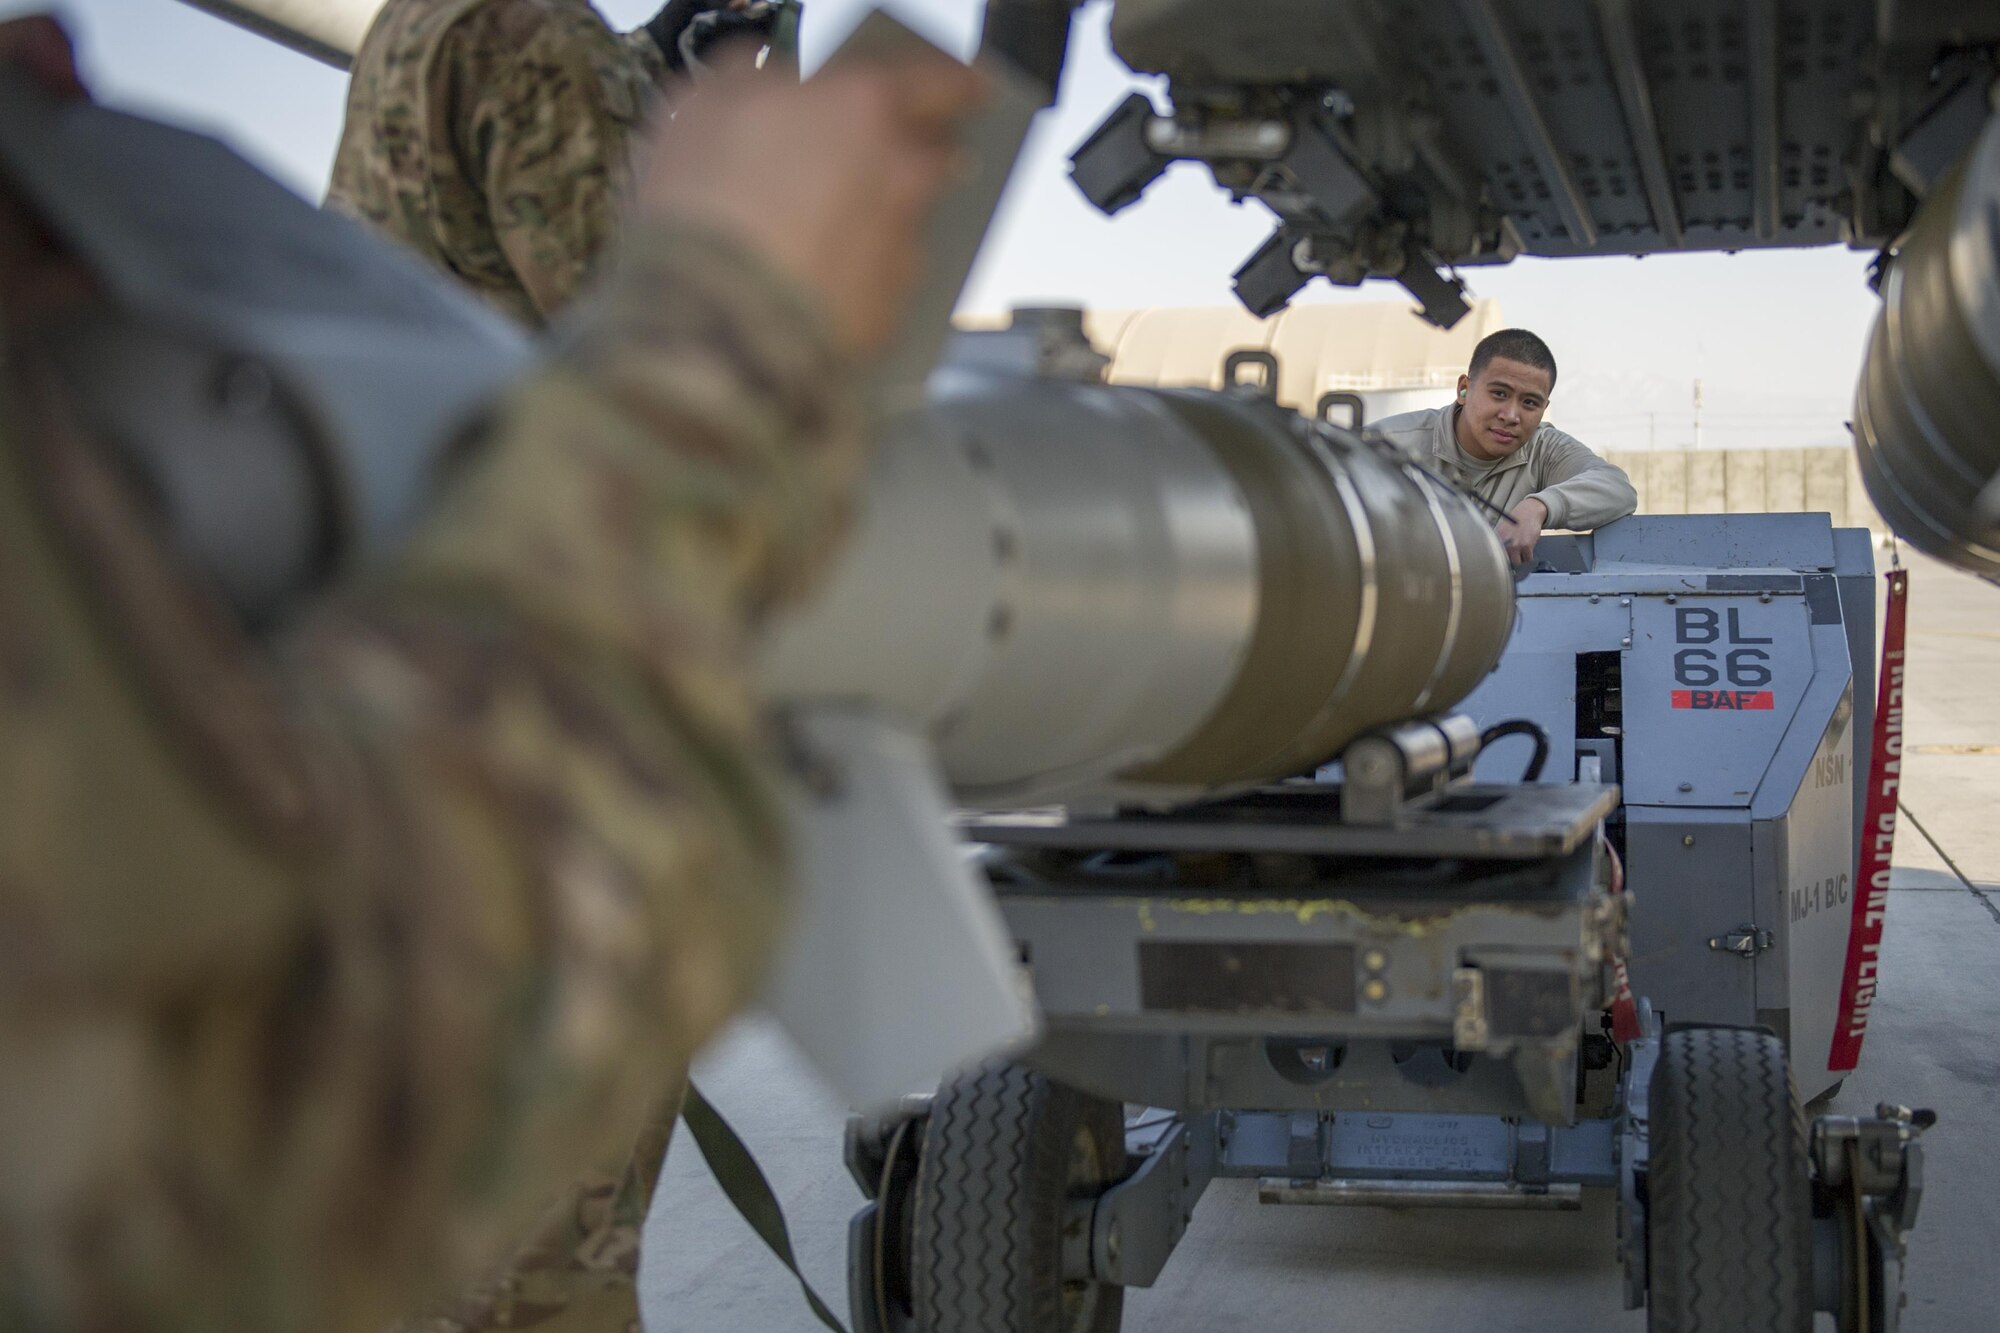 Airman 1st Class Rhaymark Neri, 455th Expeditionary Aircraft Maintenance Squadron weapons load crew member, uses a MJ-1 to load a GBU-54 to an F-16 Fighting Falcon during a 30-day inspection at Bagram Airfield, Afghanistan, Jan. 15, 2016. The weapons team performs a critical role for the close air support mission, ensuring Fighting Falcon pilots have the correct and functional munitions to provide the air cover ground forces need. (U.S. Air Force photo/Tech. Sgt. Robert Cloys)